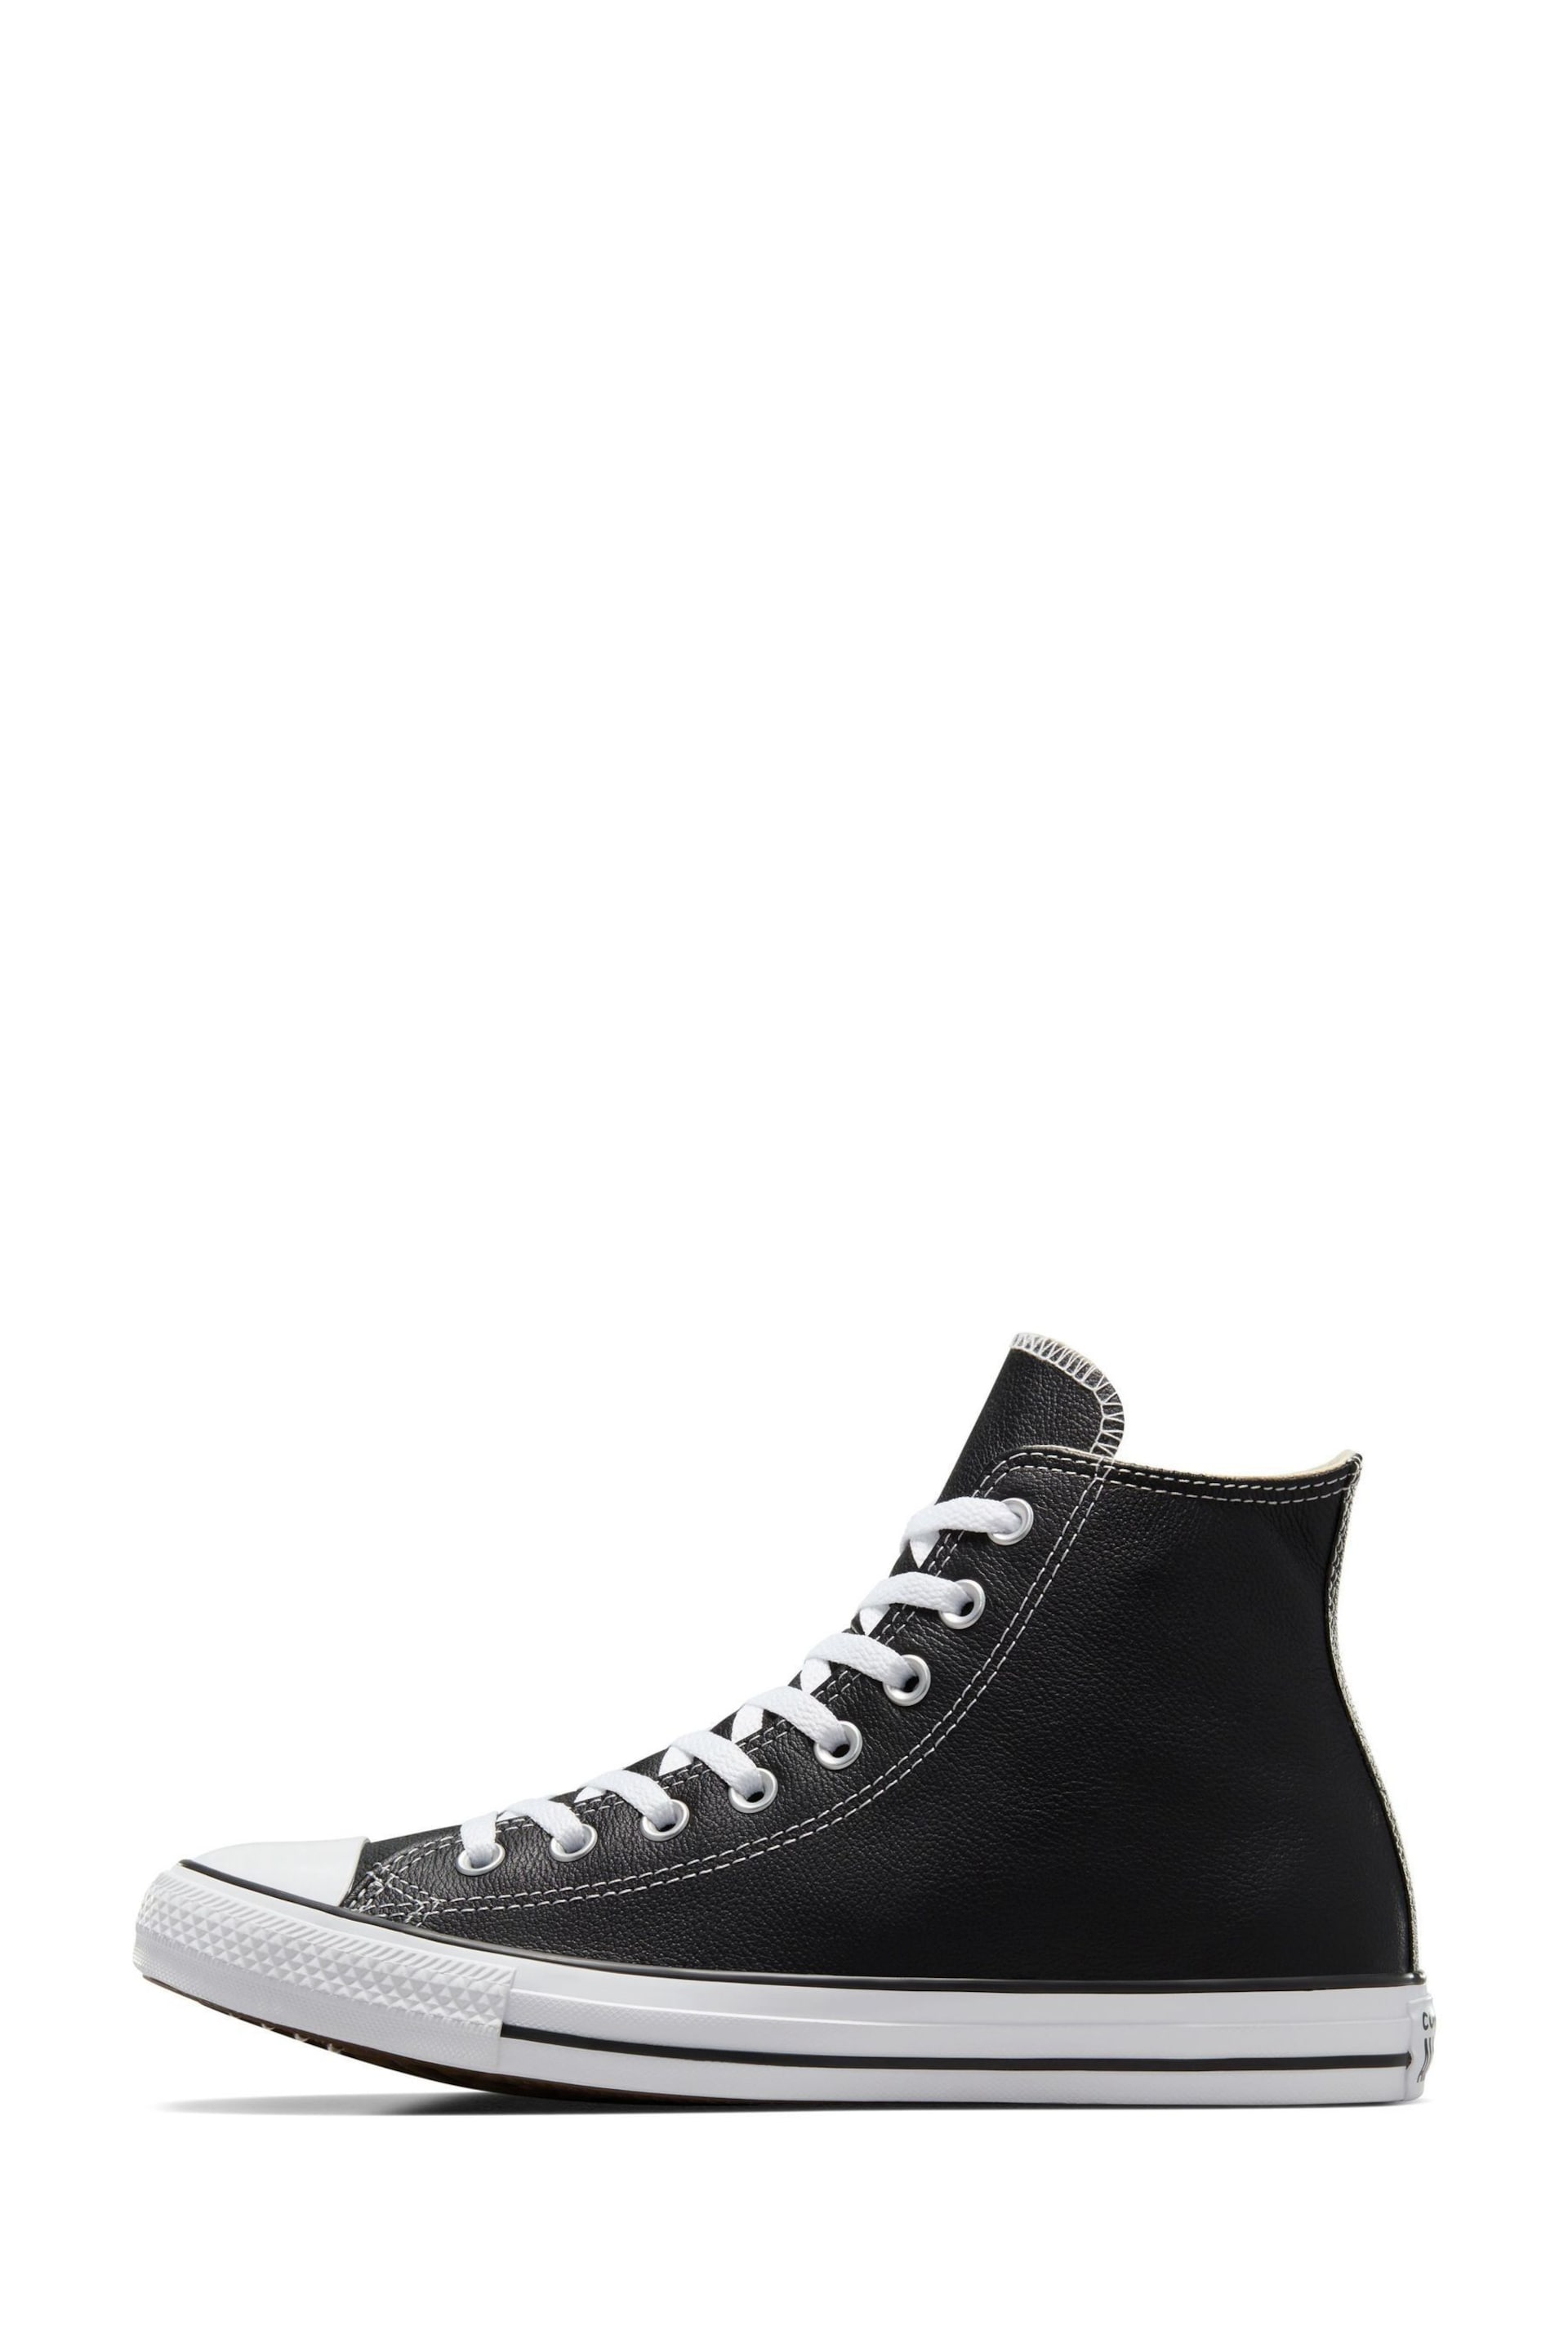 Converse Black Leather Chuck Taylor All Star High Top Trainers - Image 5 of 11